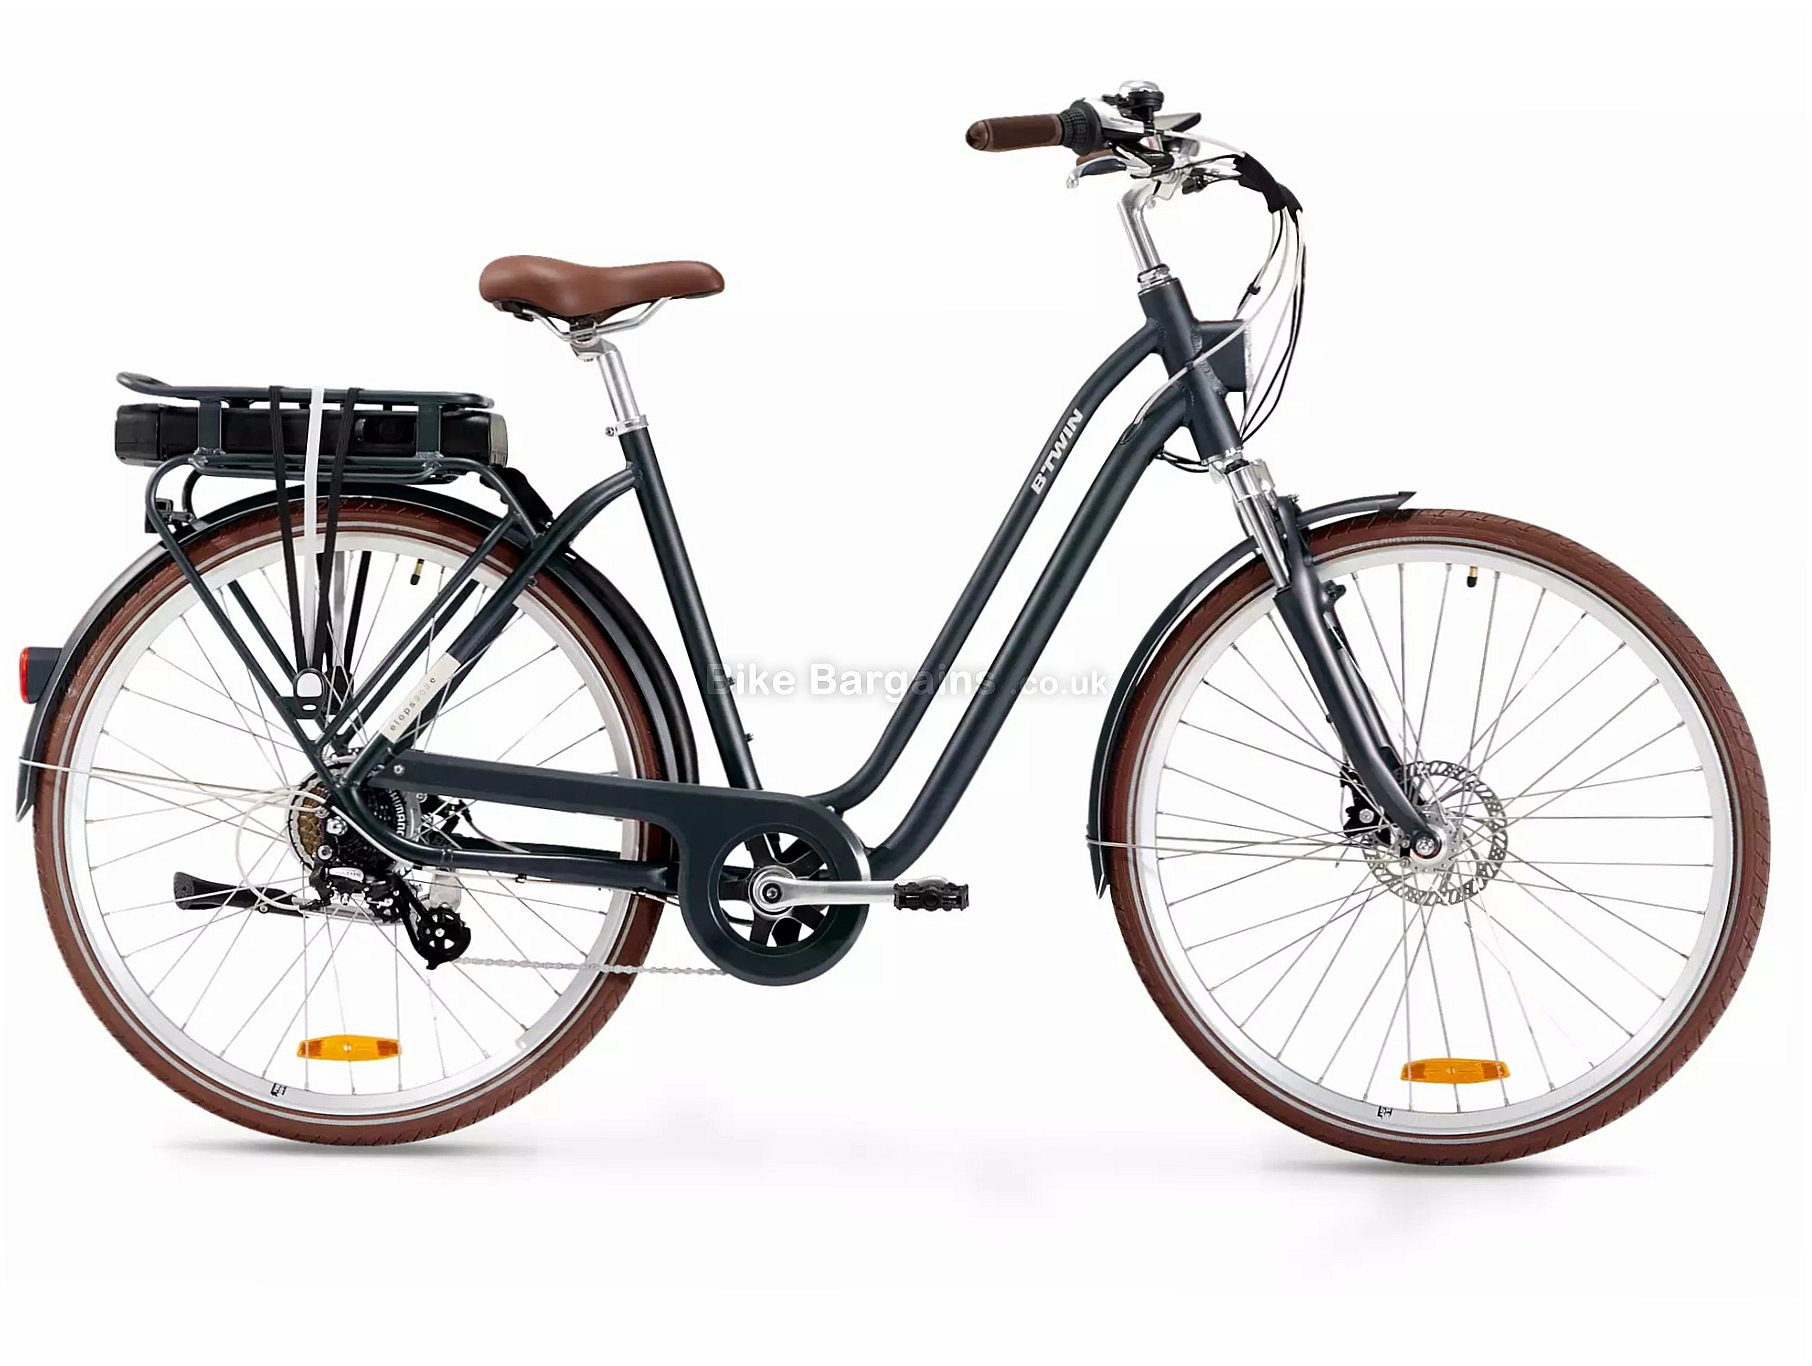 btwin electric cycle